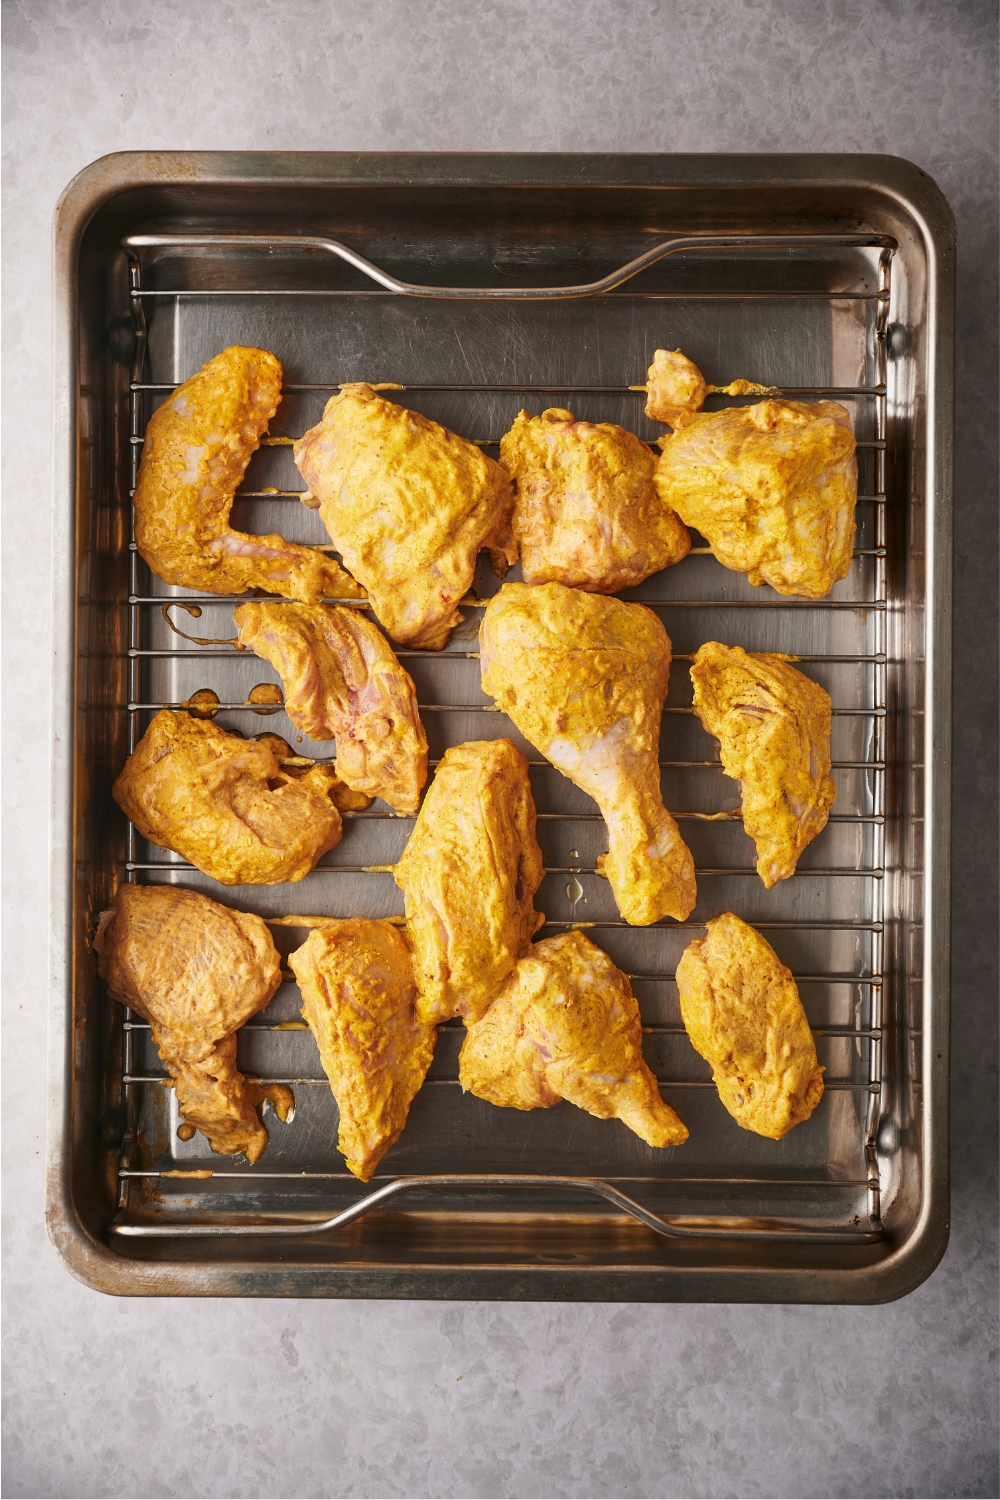 Unbaked tandoori chicken spread evenly on a grill pan that's on top of a roasting pan.